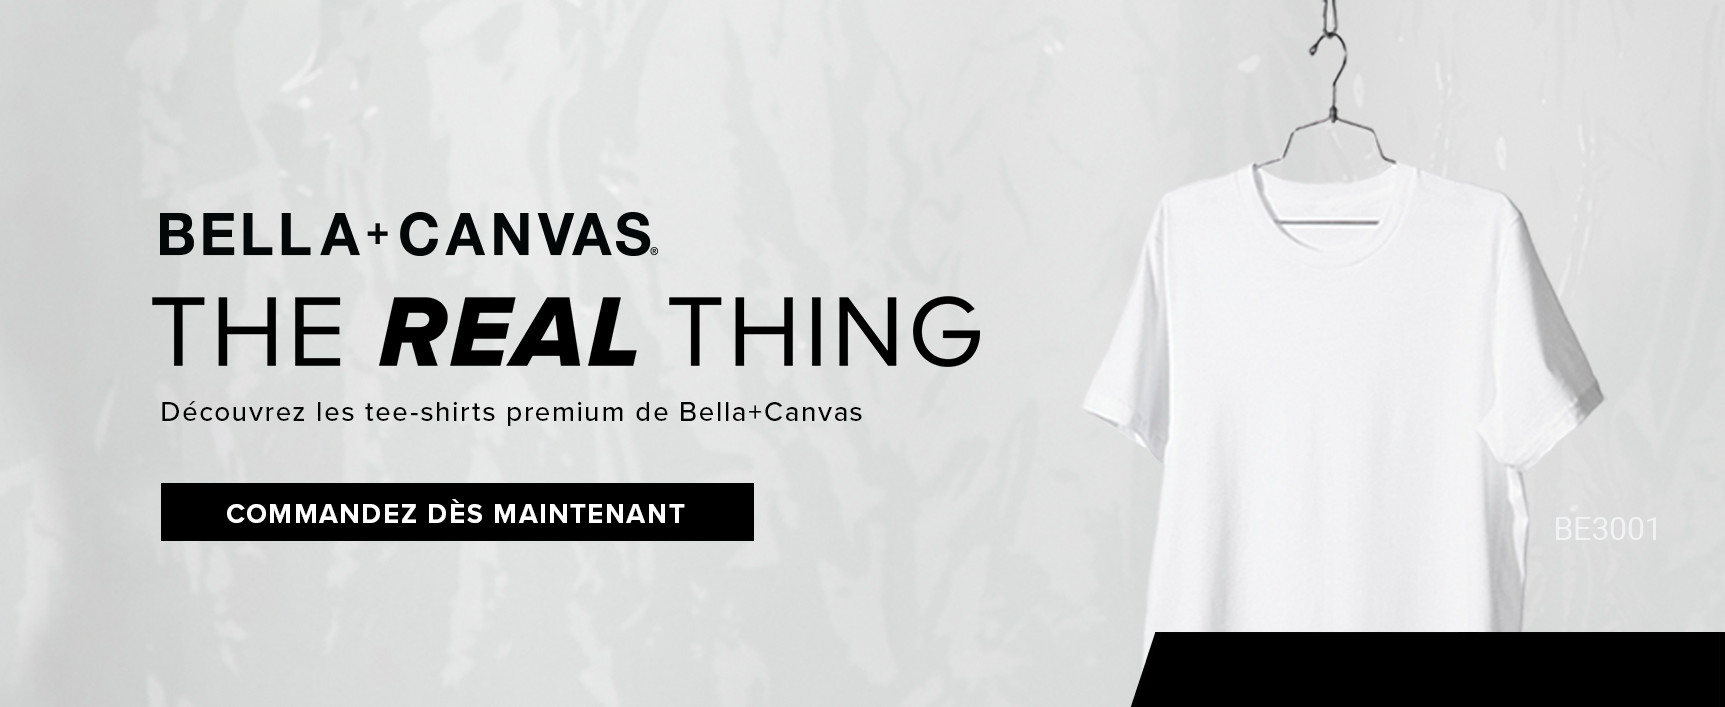 Bella+Canvas - The Real Thing